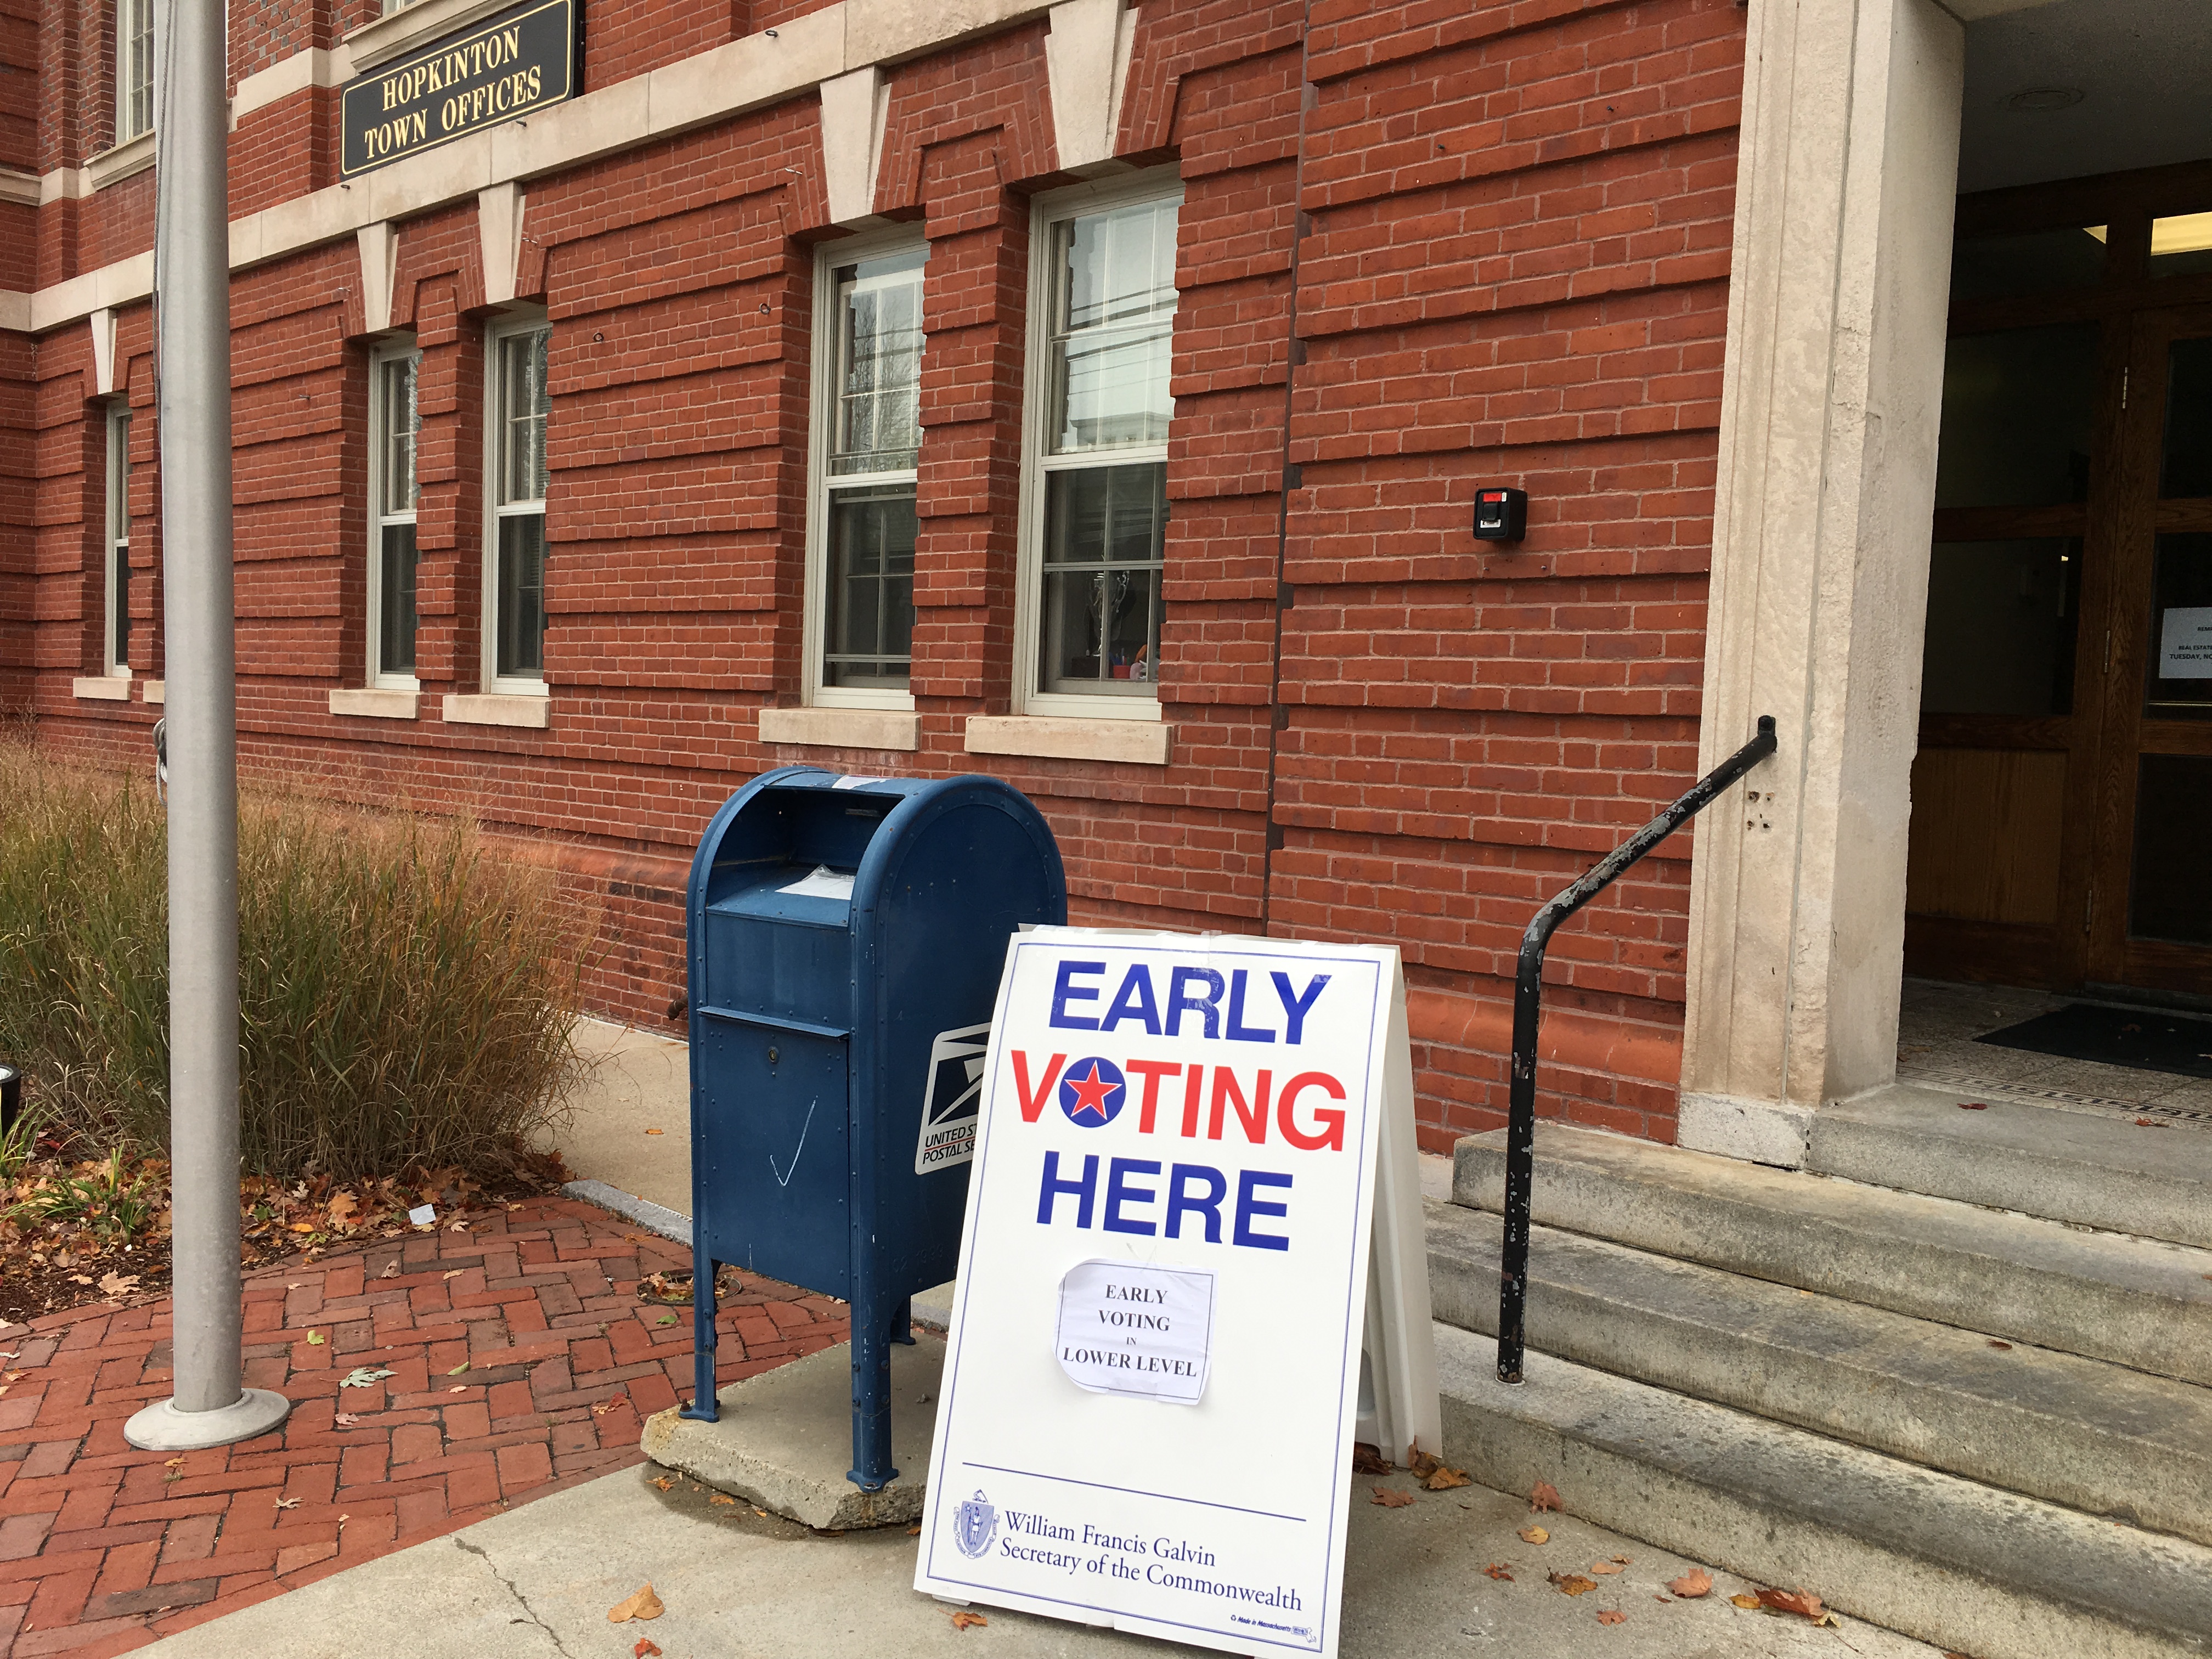 Early Voting Continues Until Nov. 4 or Vote at the Polls on Nov. 8